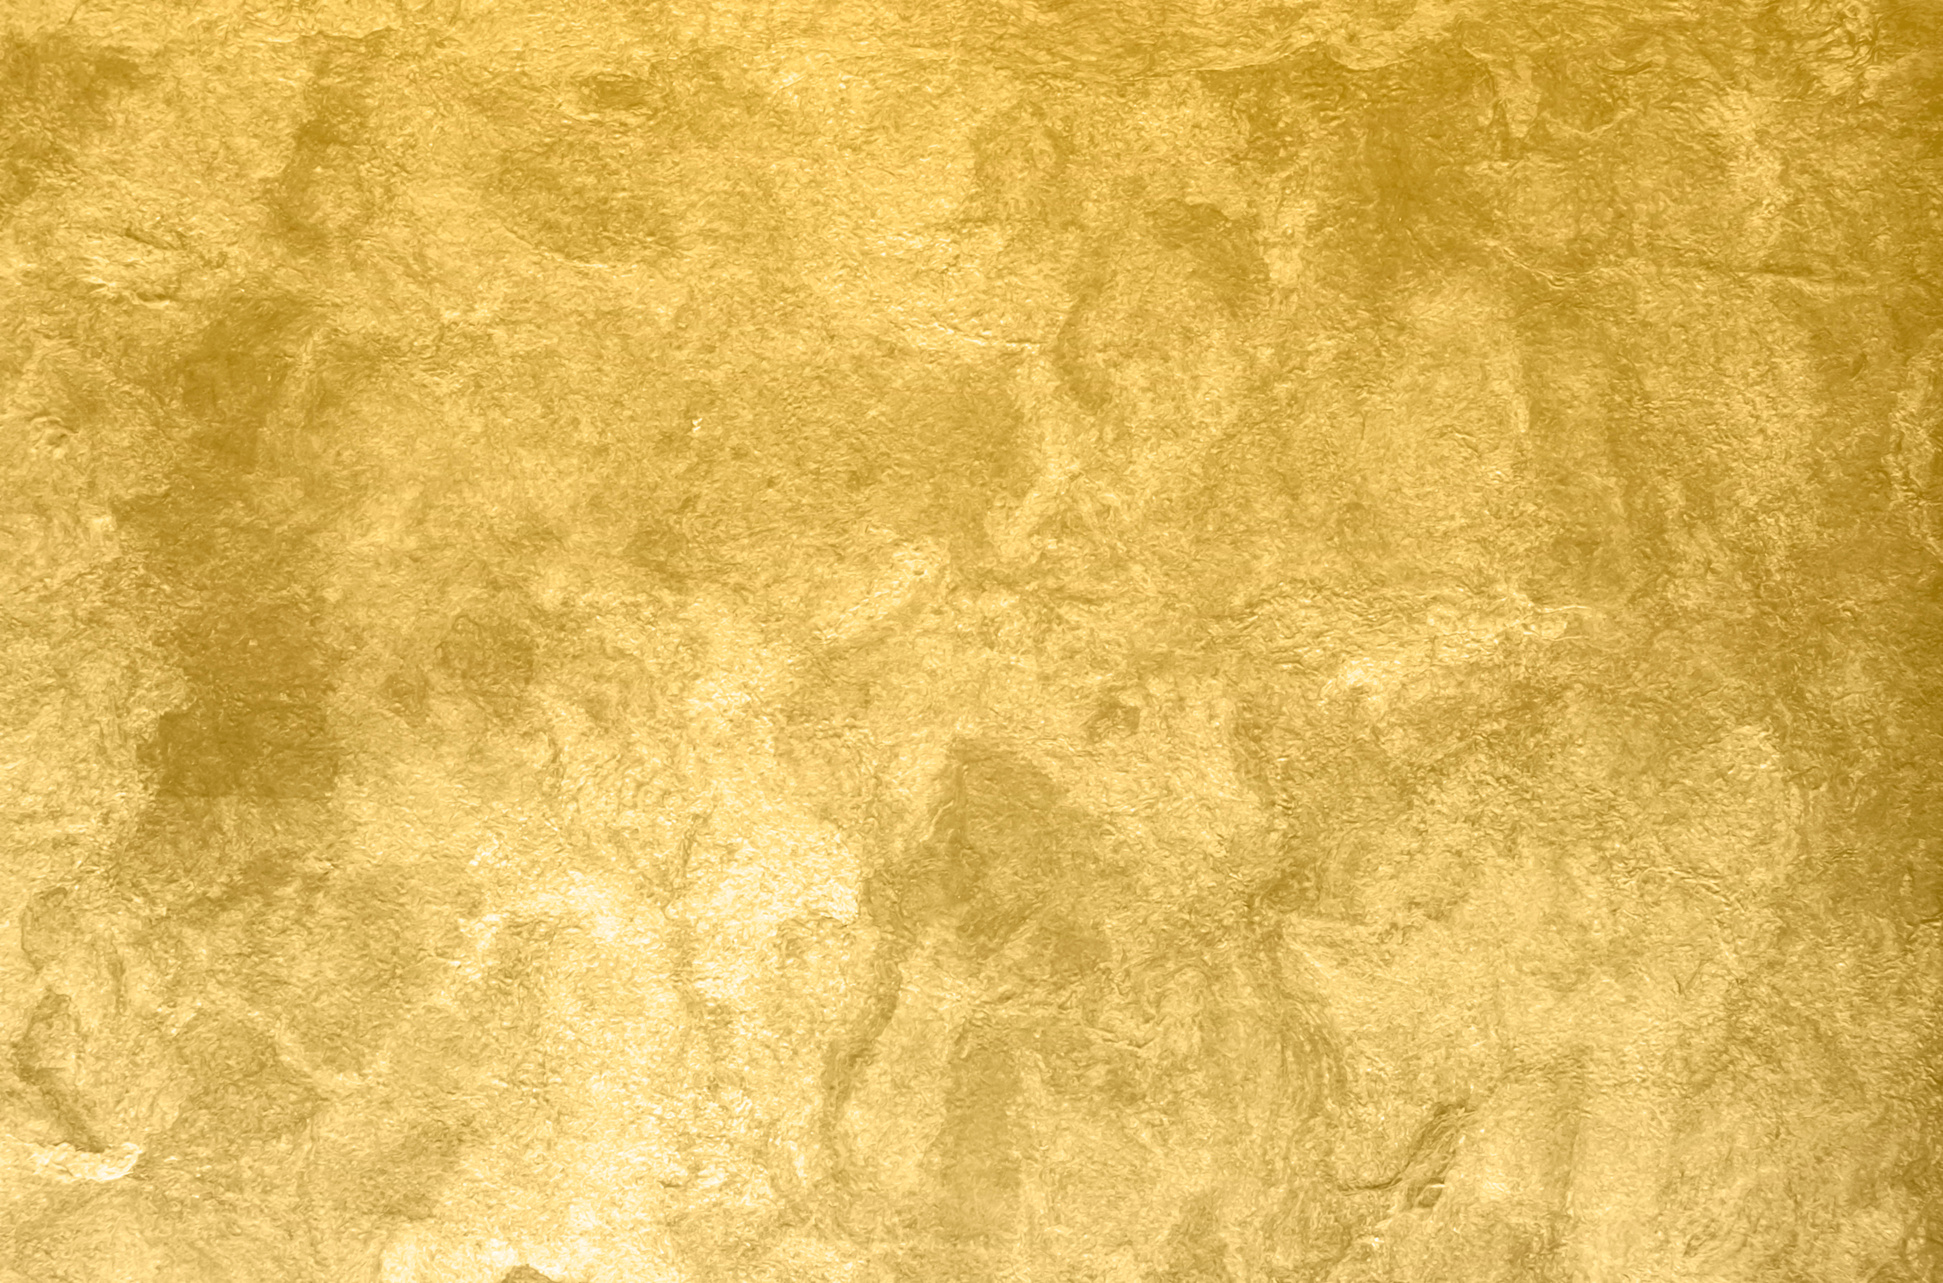 Gold patterned texture background.